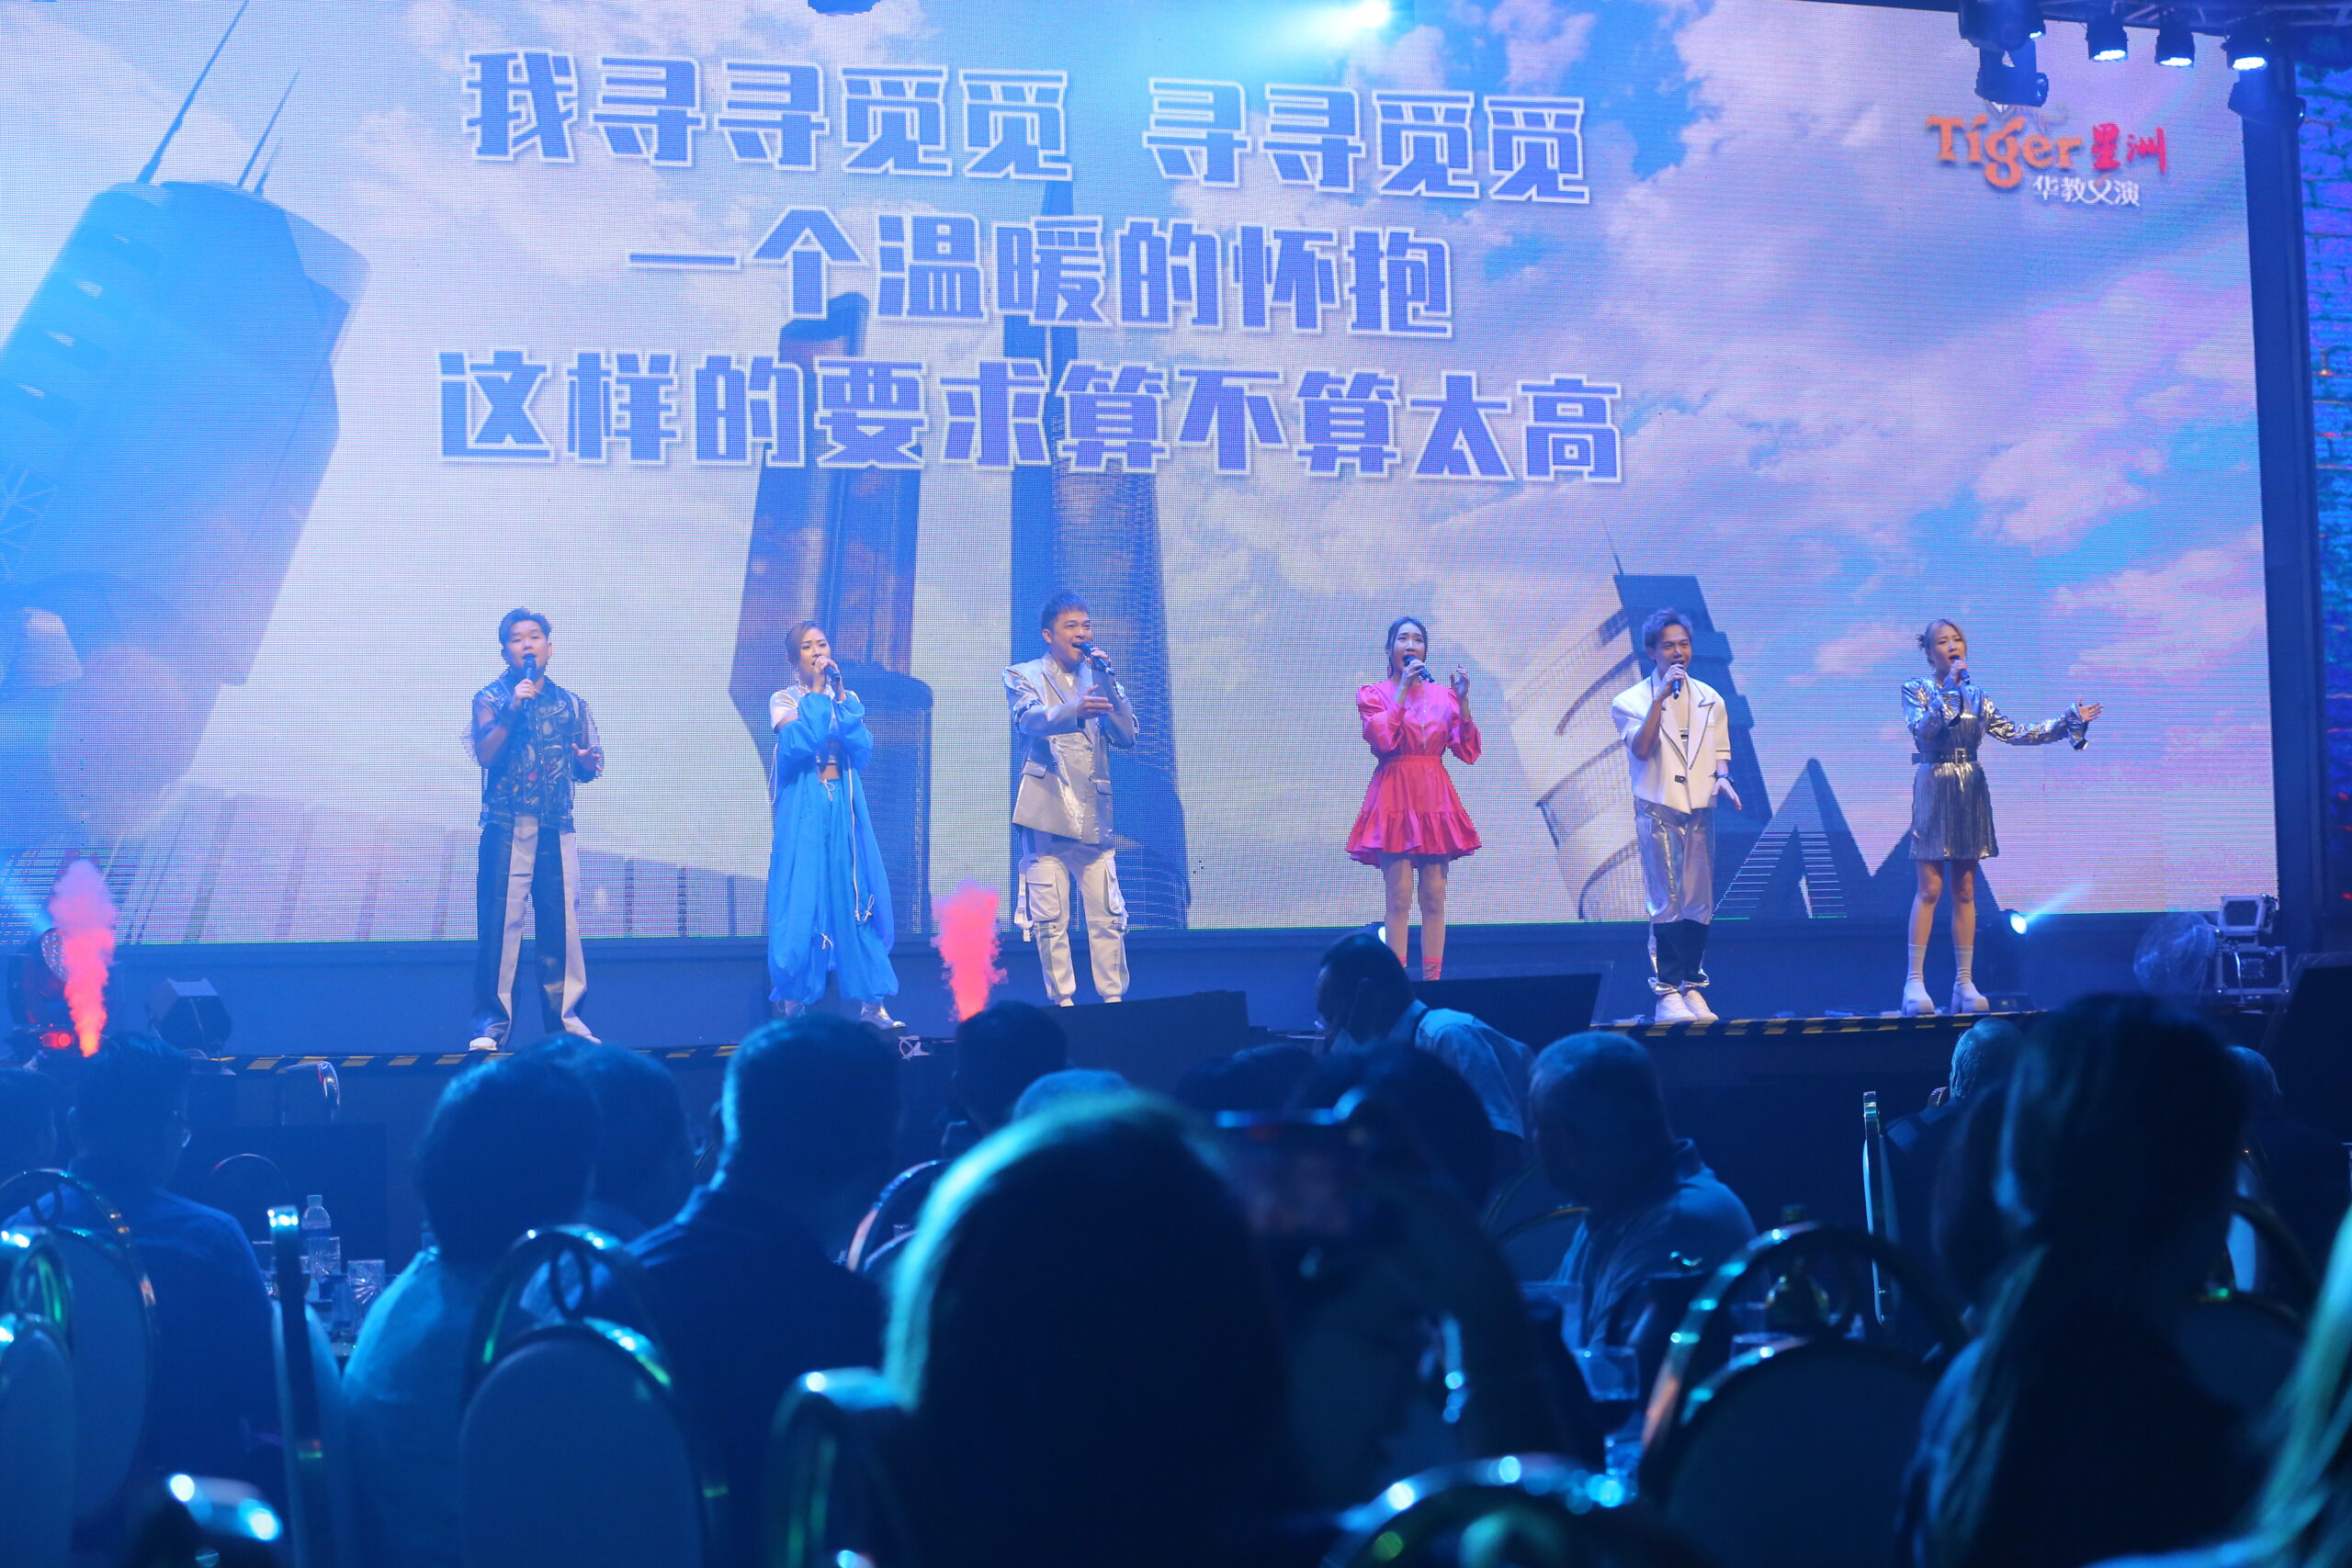 Tiger chinese education charity concert singing performance